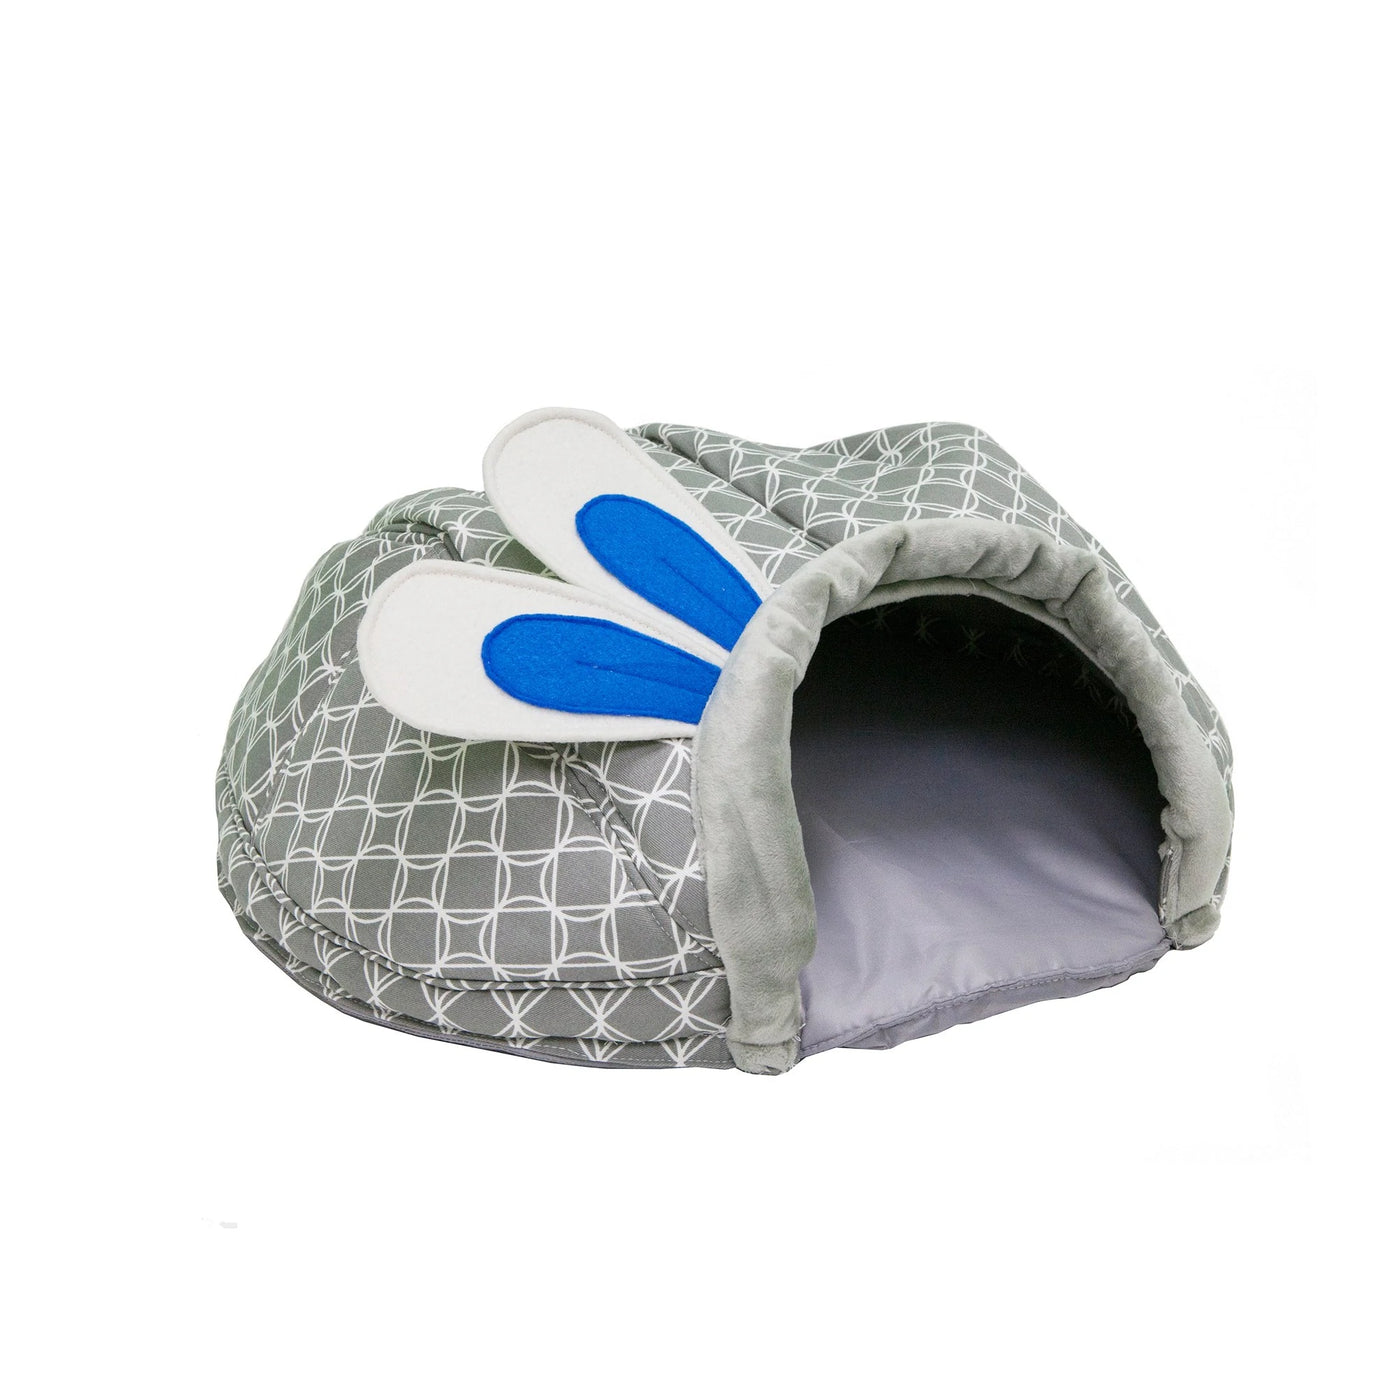 Petique Inc Critter Dome Sleep and Play House